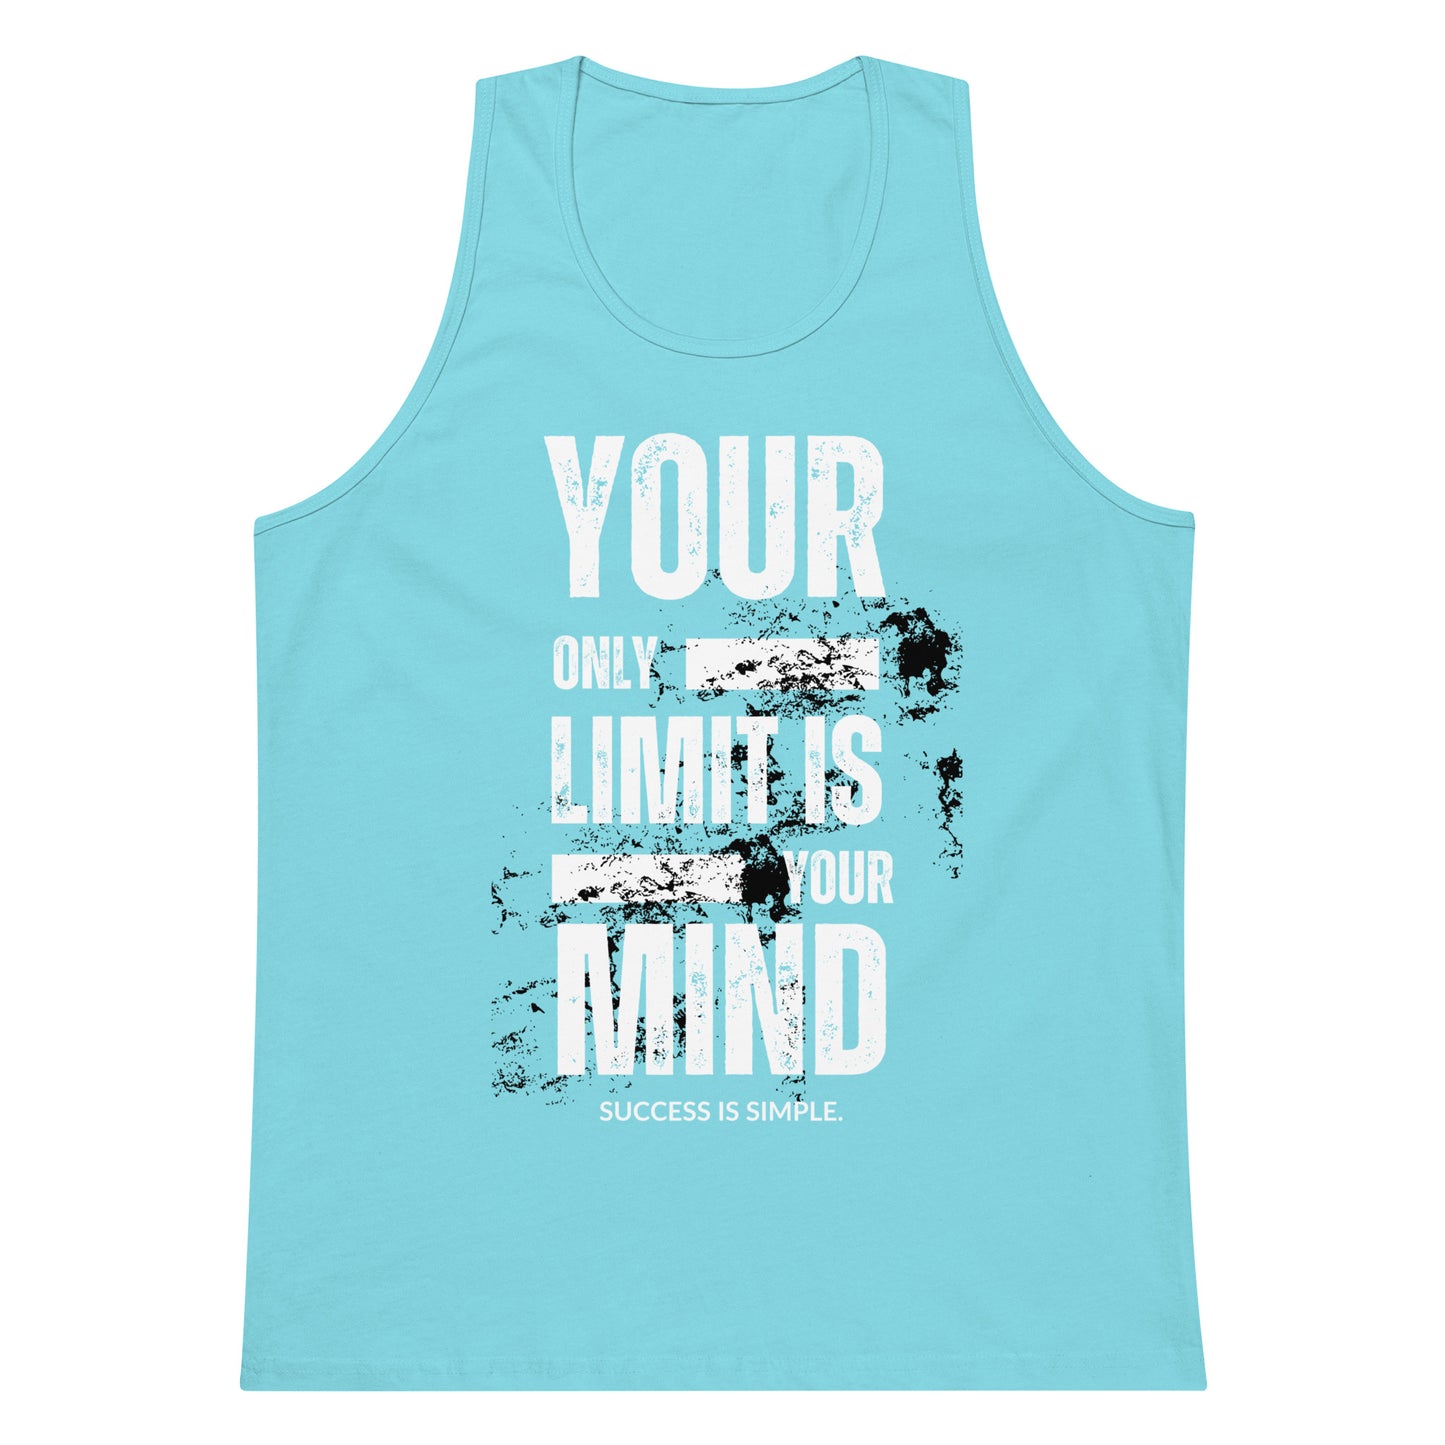 Your Only Limit Is Your Mind - Men’s premium tank top